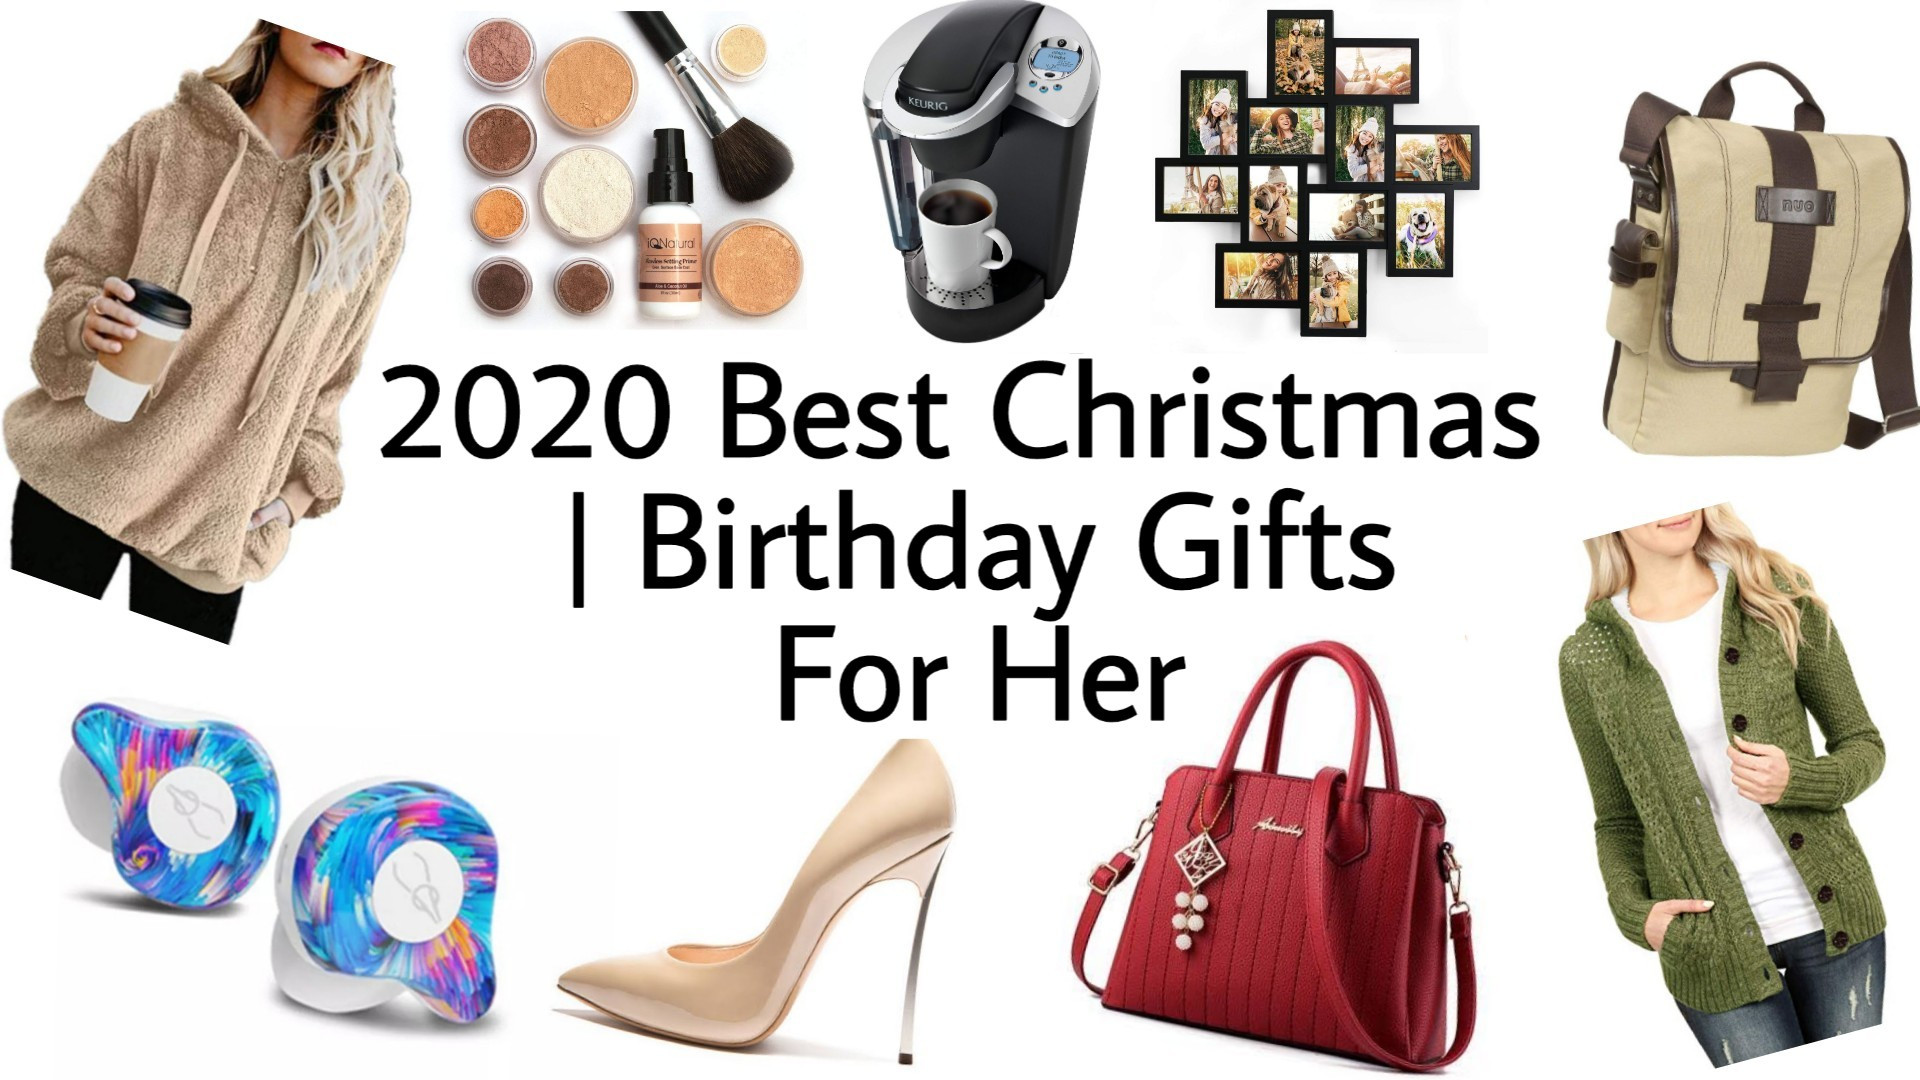 Girlfriend Gift Ideas 2020
 Top Christmas Gifts for Her Girls Girlfriend Wife 2021